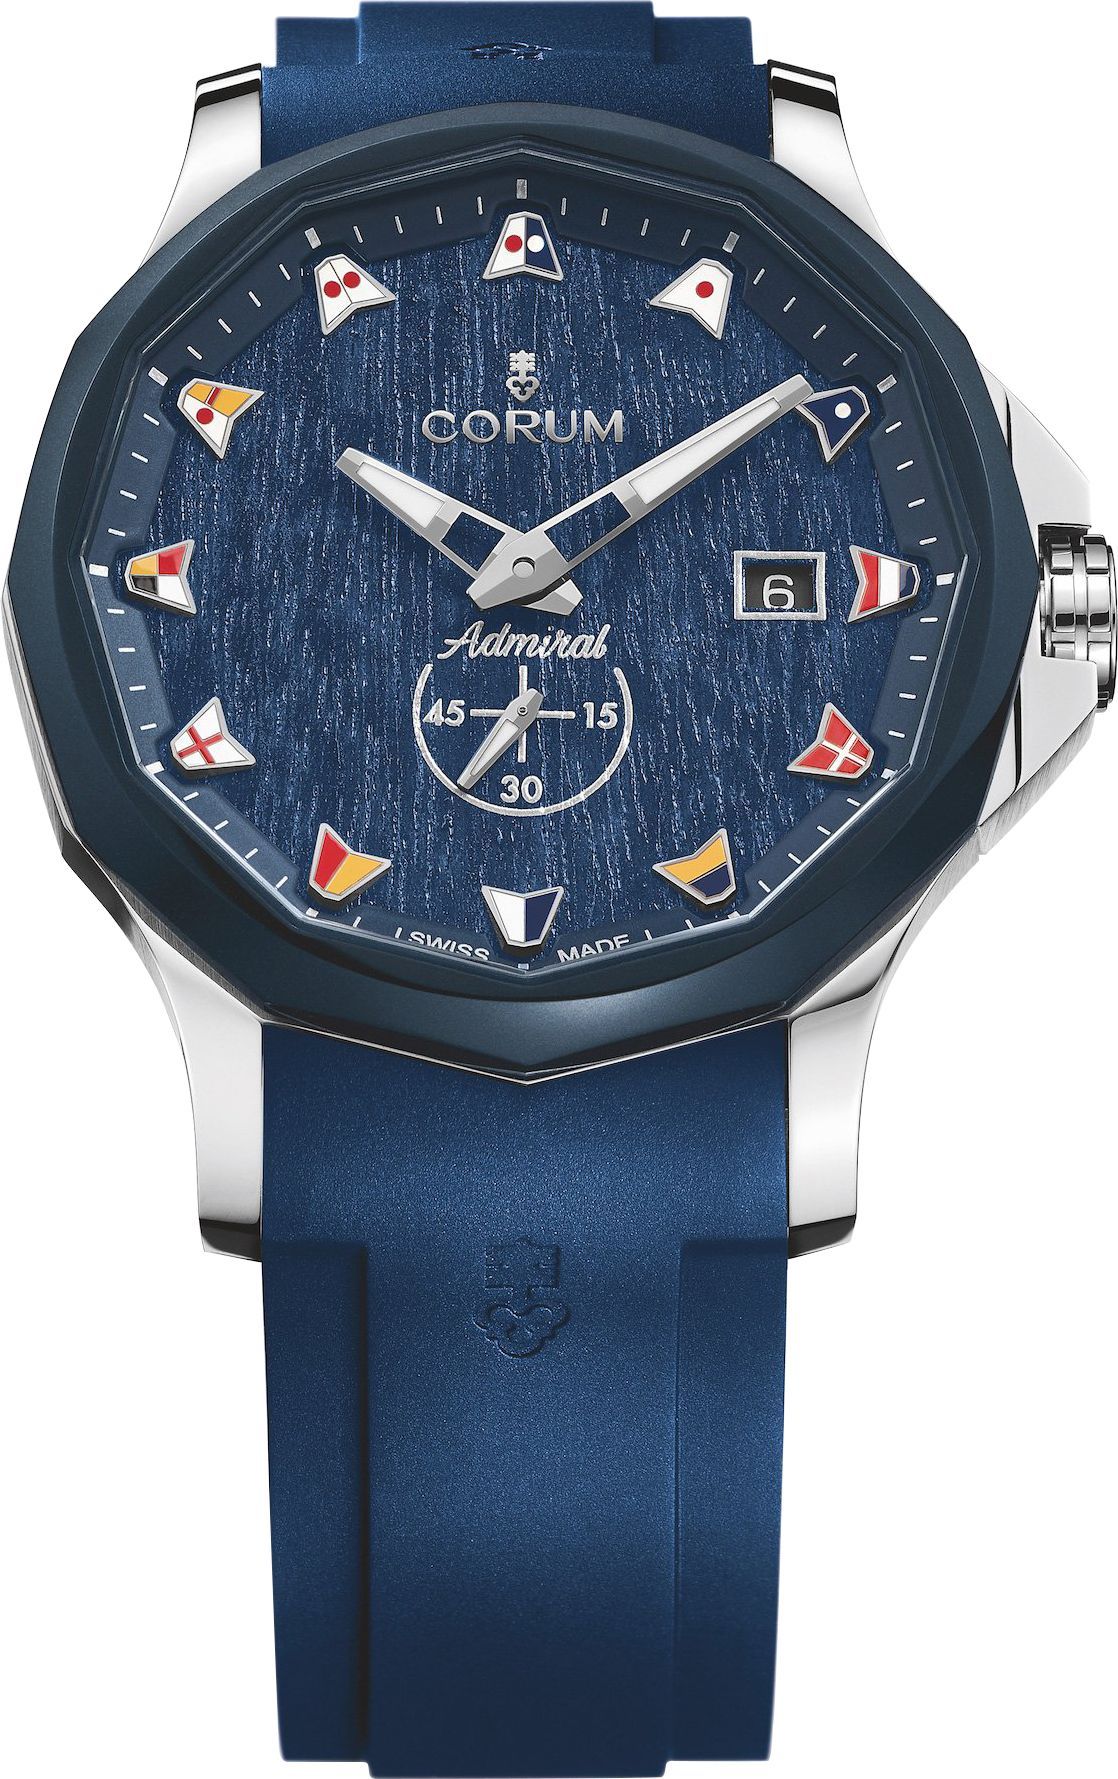 Corum Admiral 42 42 mm Watch in Blue Dial For Men - 1